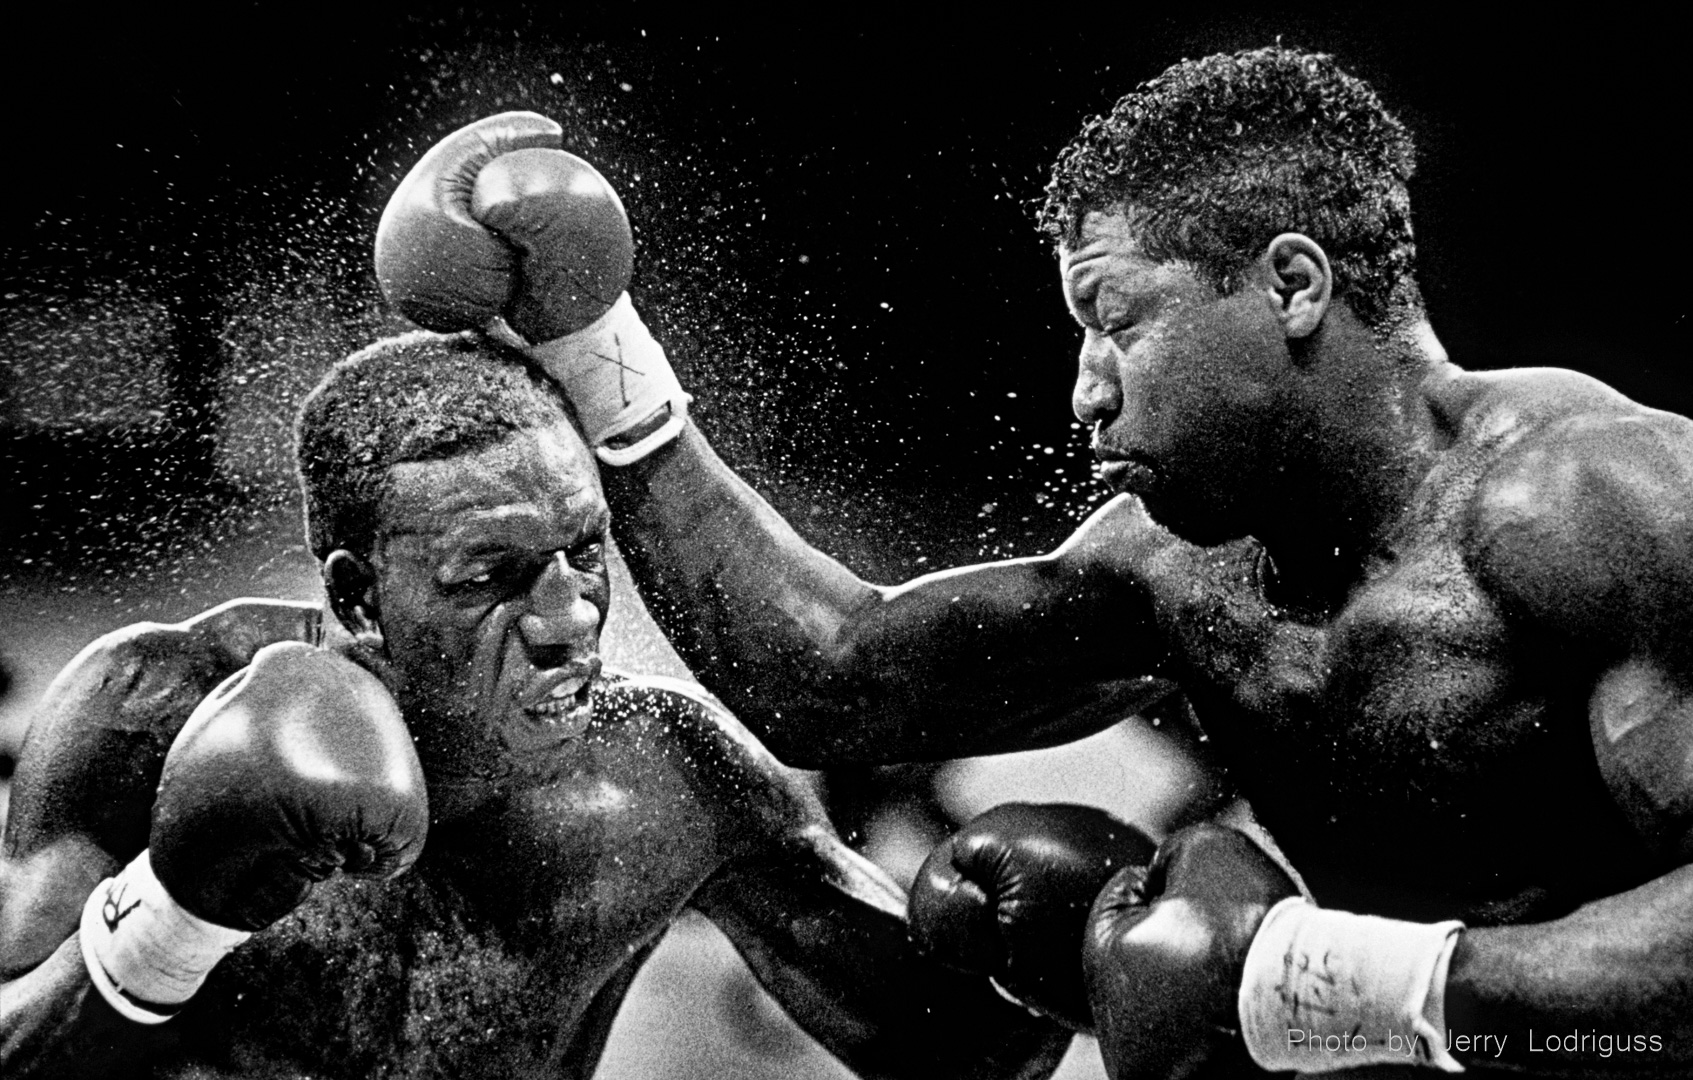 Heavyweight Ray Mercer (right) pounds opponent Wesley Watson in this fight at the Blue Horizon Boxing club in 1990.